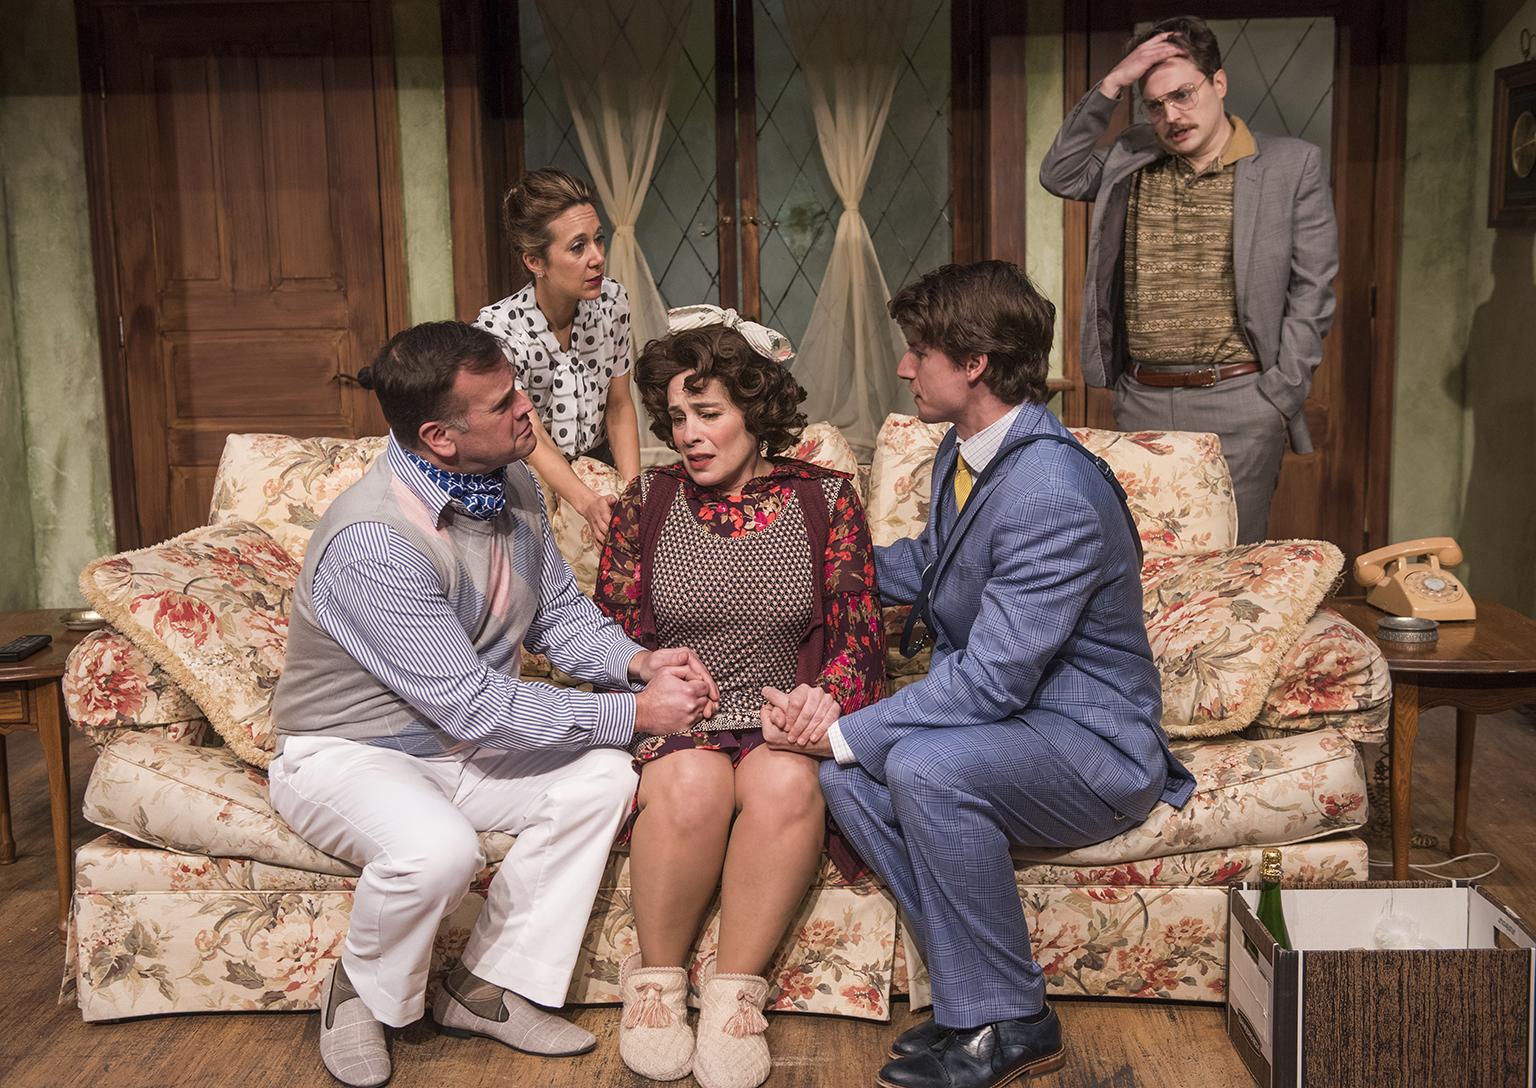 Windy City Playhouse Stages Breathtaking Production of ‘Noises Off